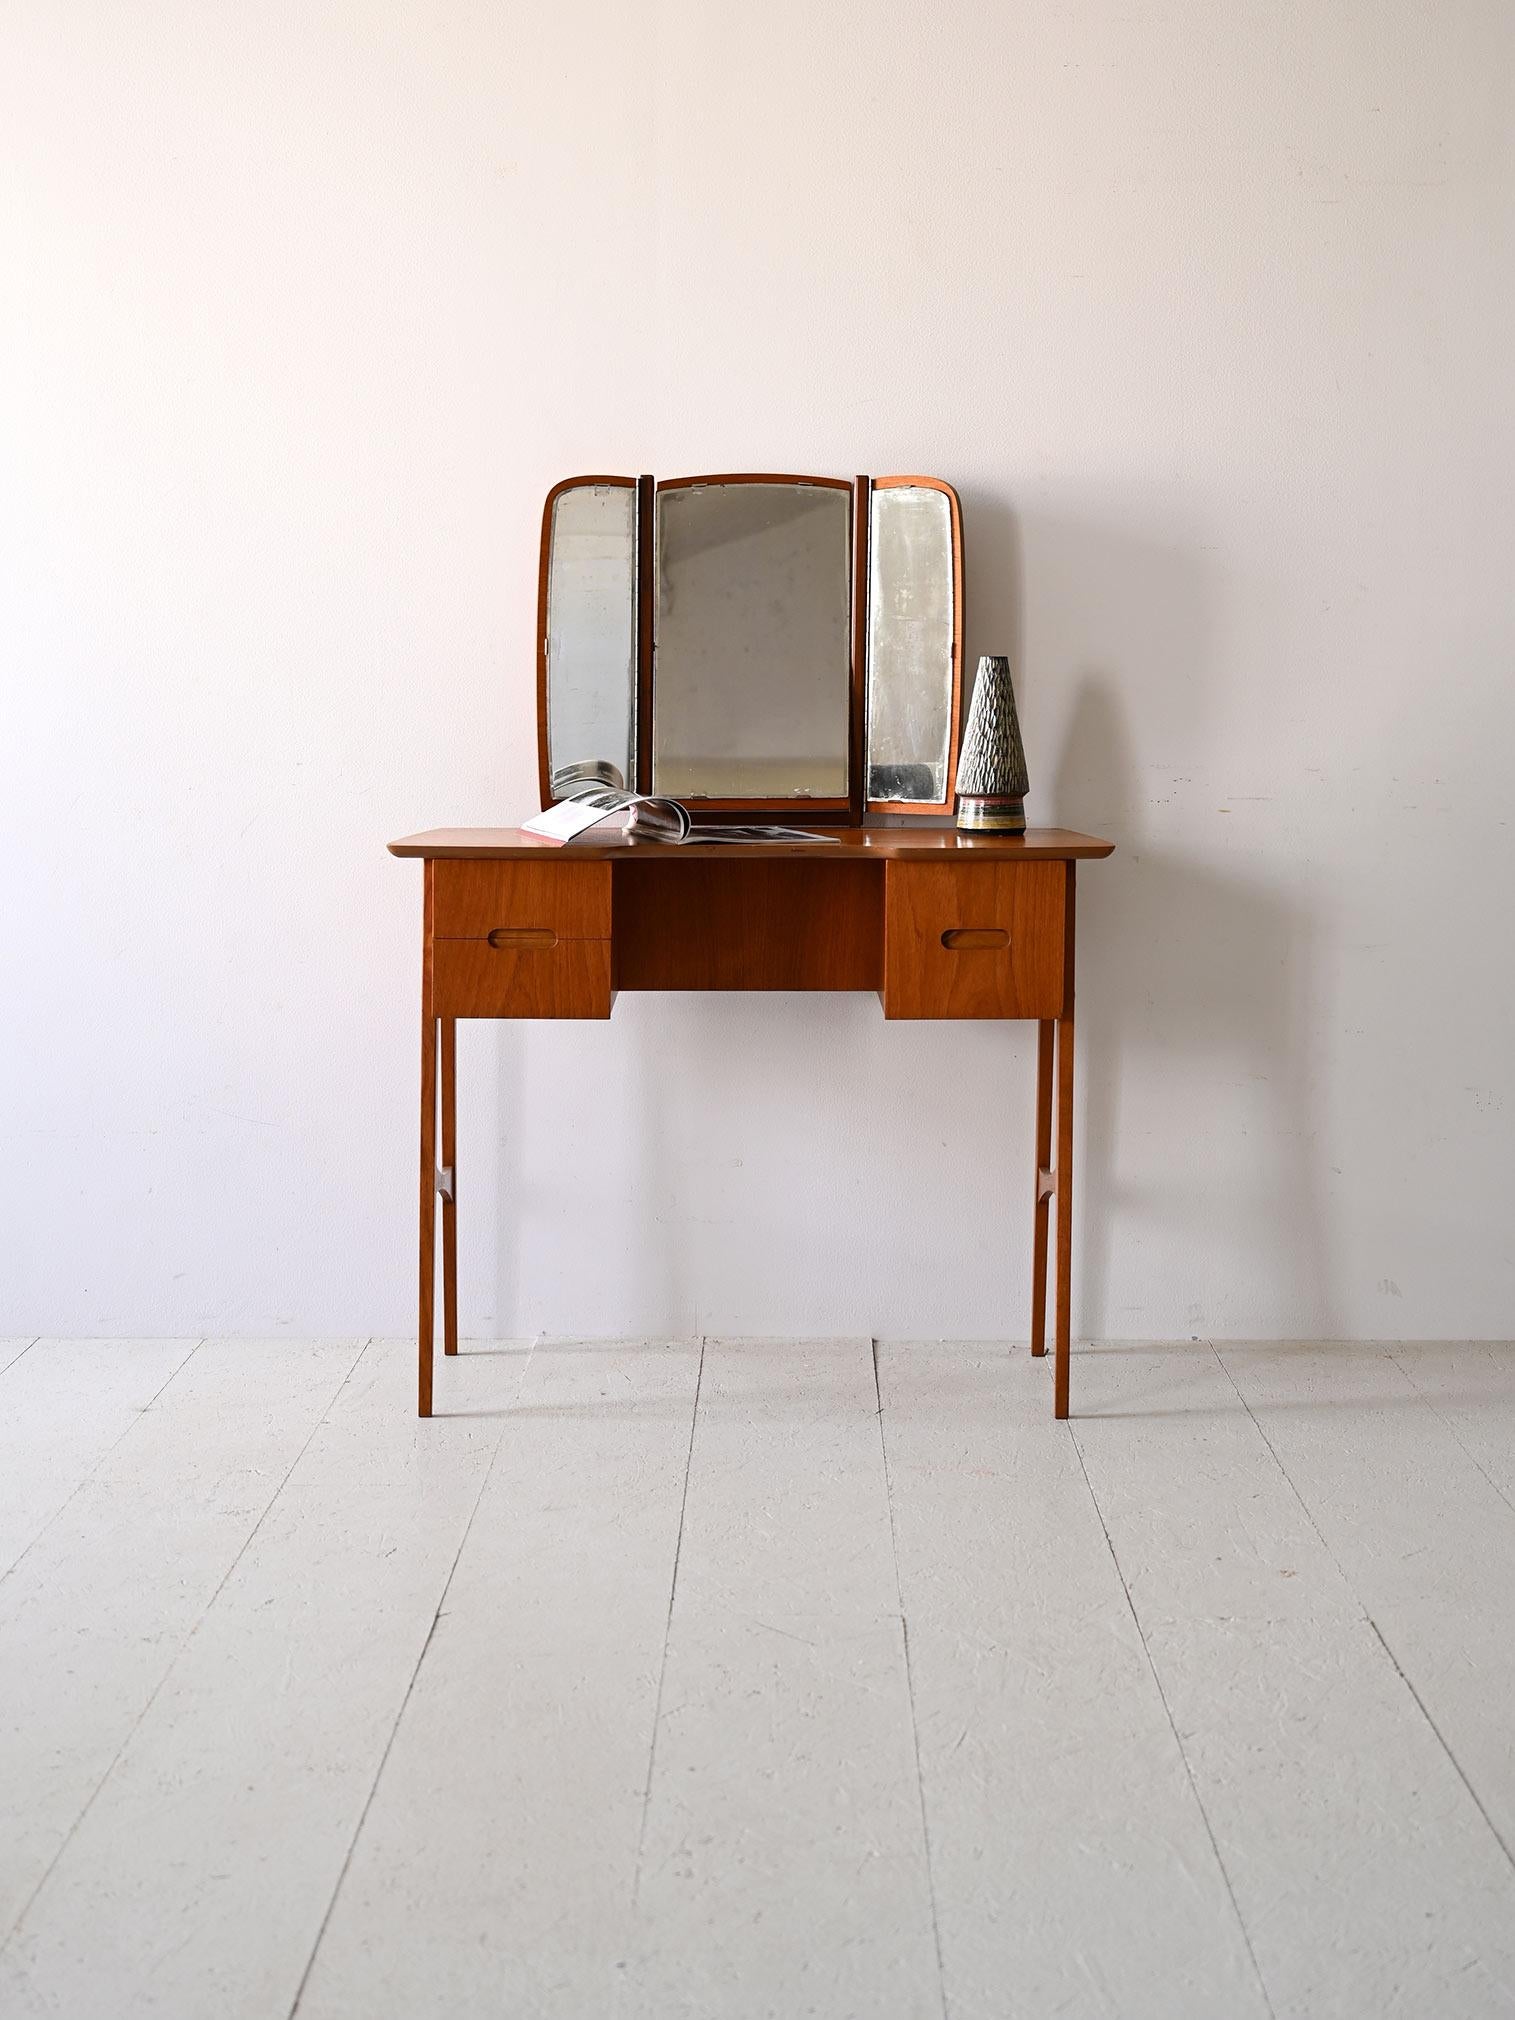 Grooming  scandinavian vintage with mirror.

Its slender, square legs add a light, modern touch, while the rounded corners of the tabletop give it a cozy, delicate look.

One detail that makes it particularly versatile is the folding mirror, which